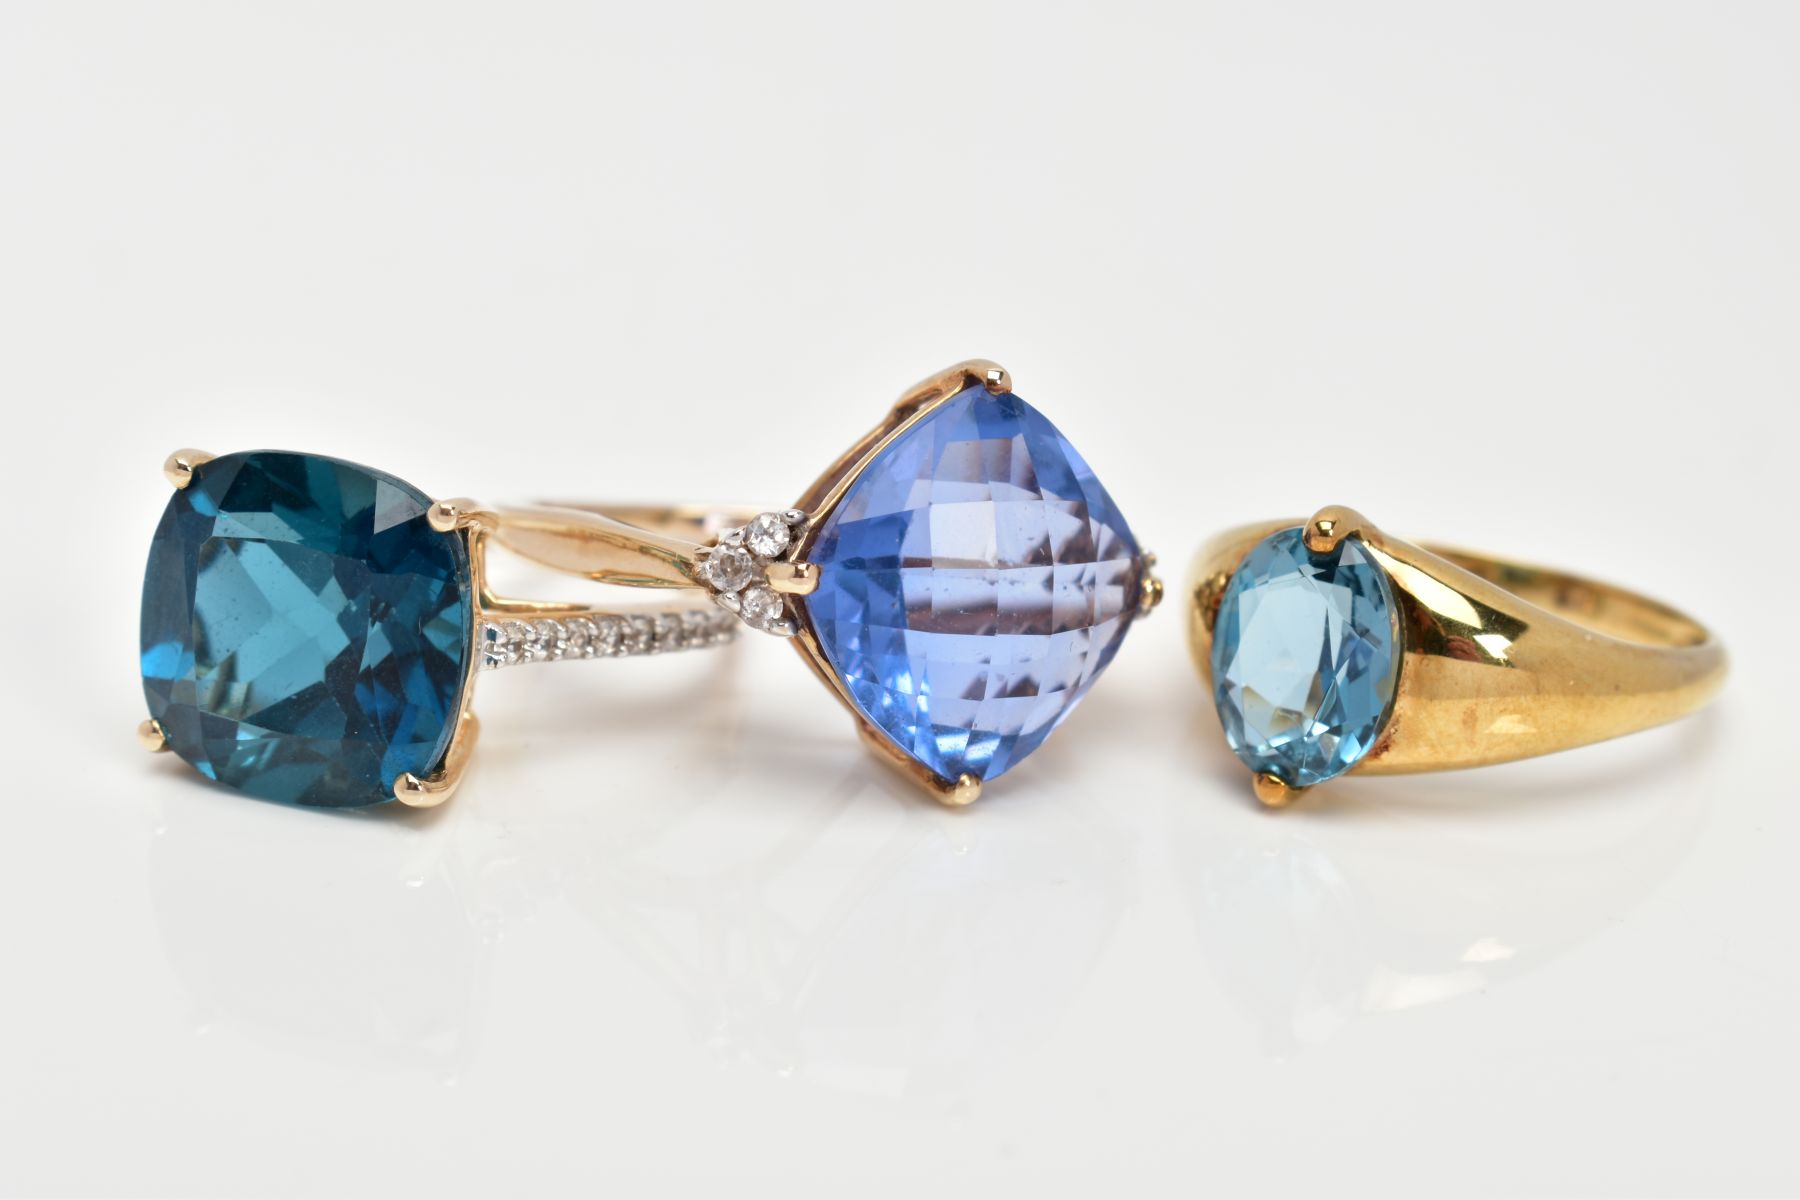 THREE 9CT GOLD GEM SET DRESS RINGS, each set with a vary cut blue stone possibly topaz/fluorite - Image 2 of 3